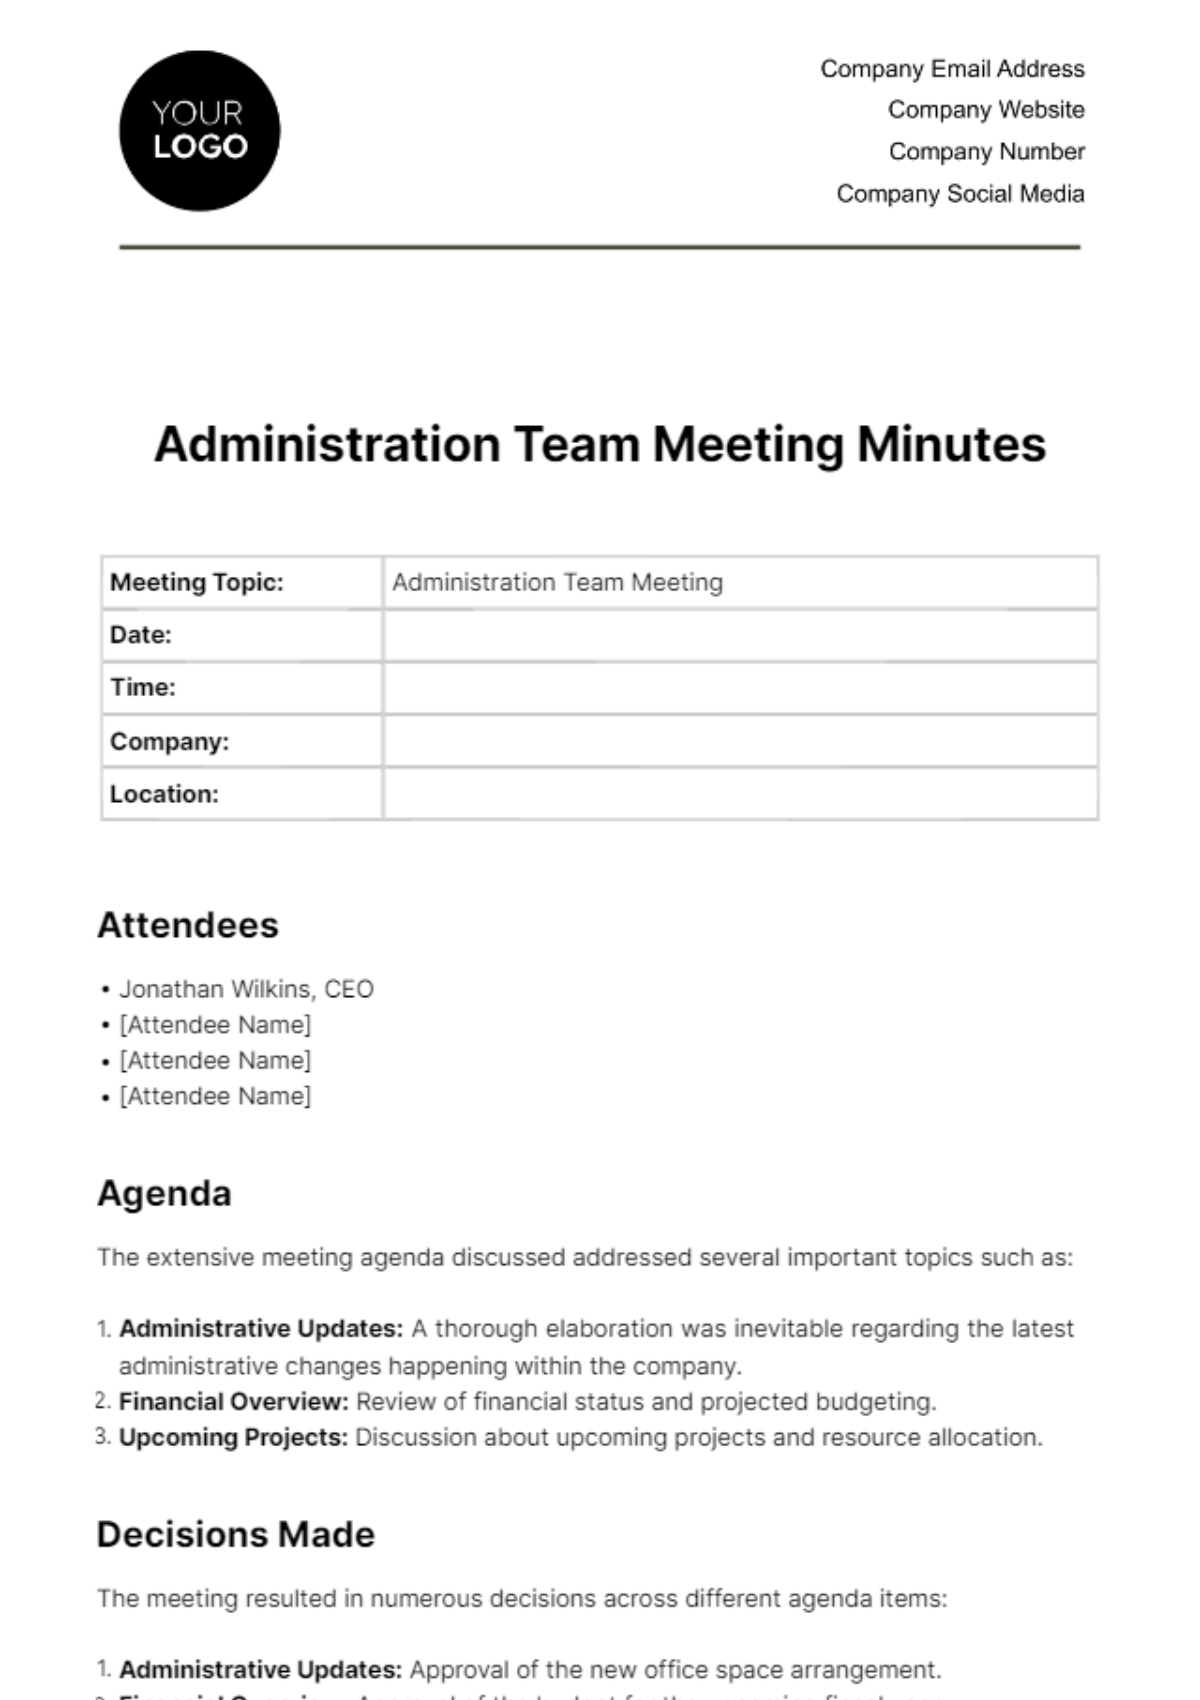 Free Administration Team Meeting Minute Template